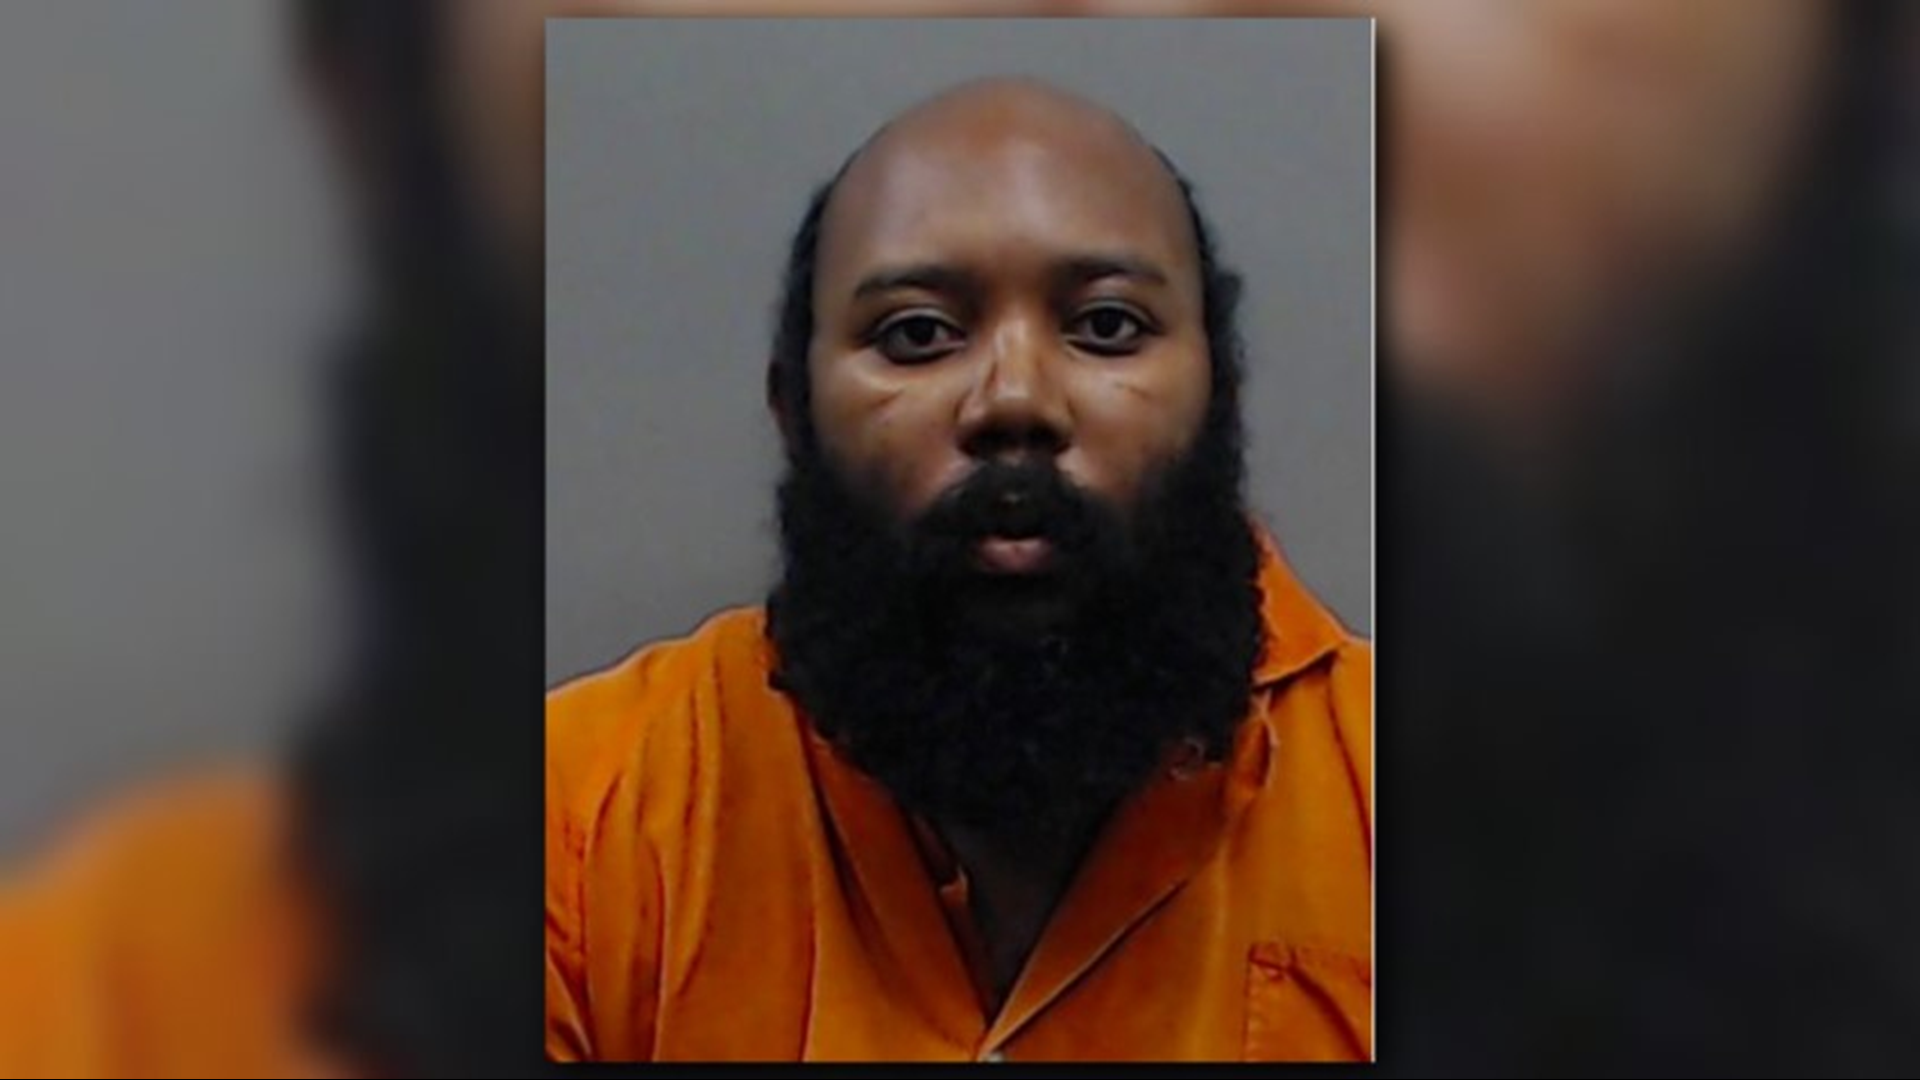 Smith County Jail inmate dies, Texas Rangers investigating cbs19.tv